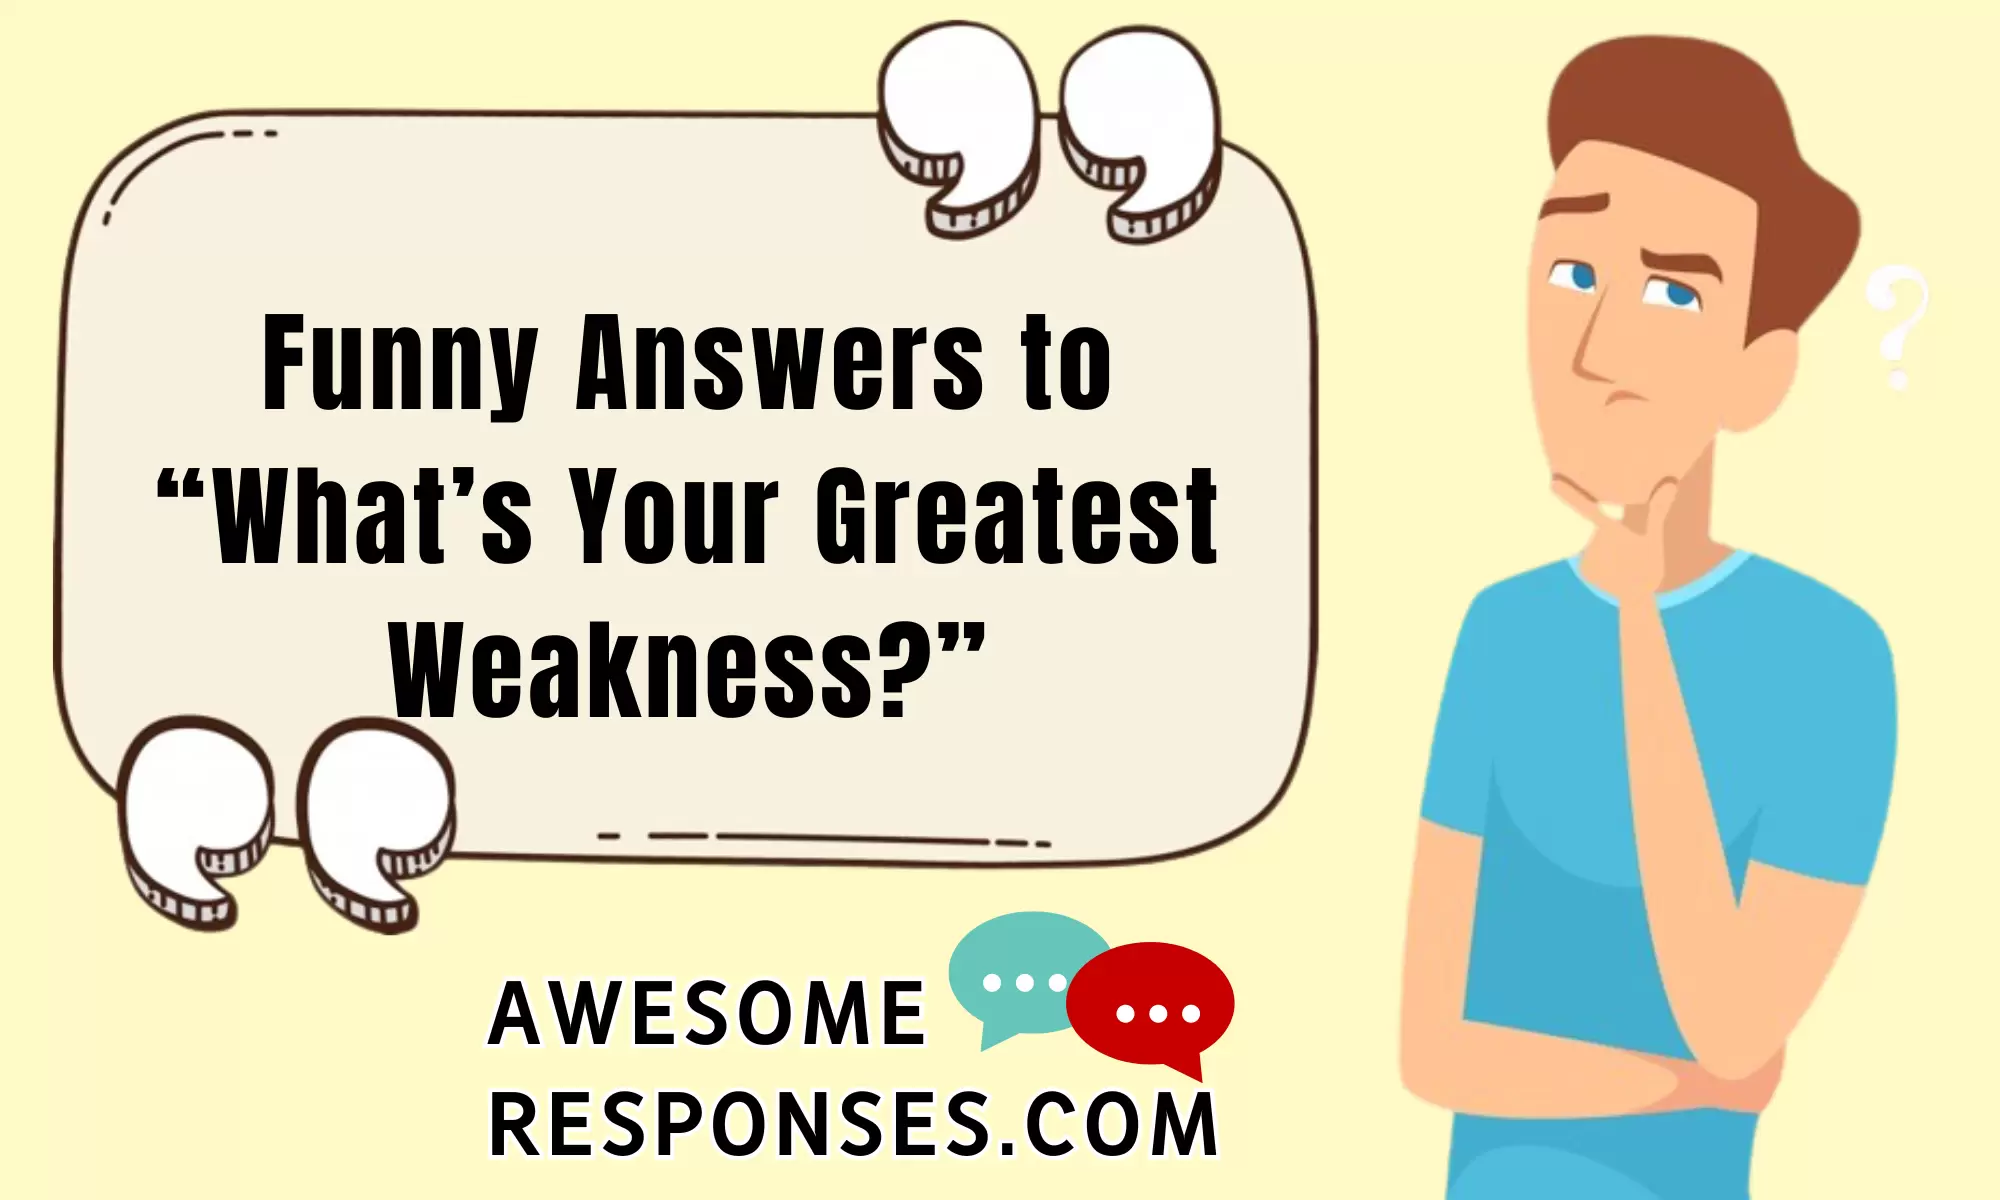 Funny Answers to “What’s Your Greatest Weakness?”